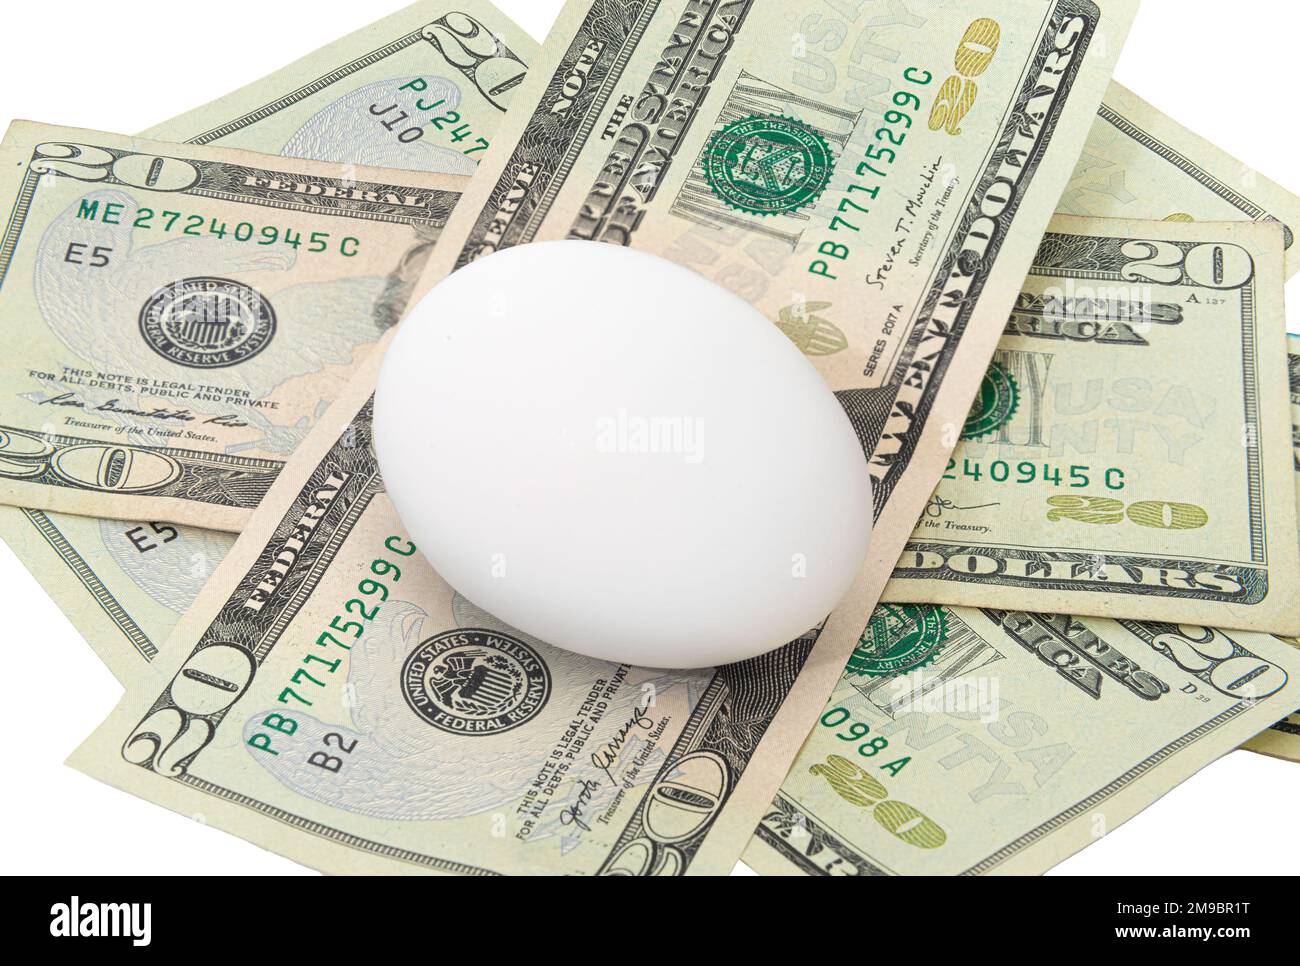 A single egg sitting on five $20s illustrating high prices of eggs. Stock Photo